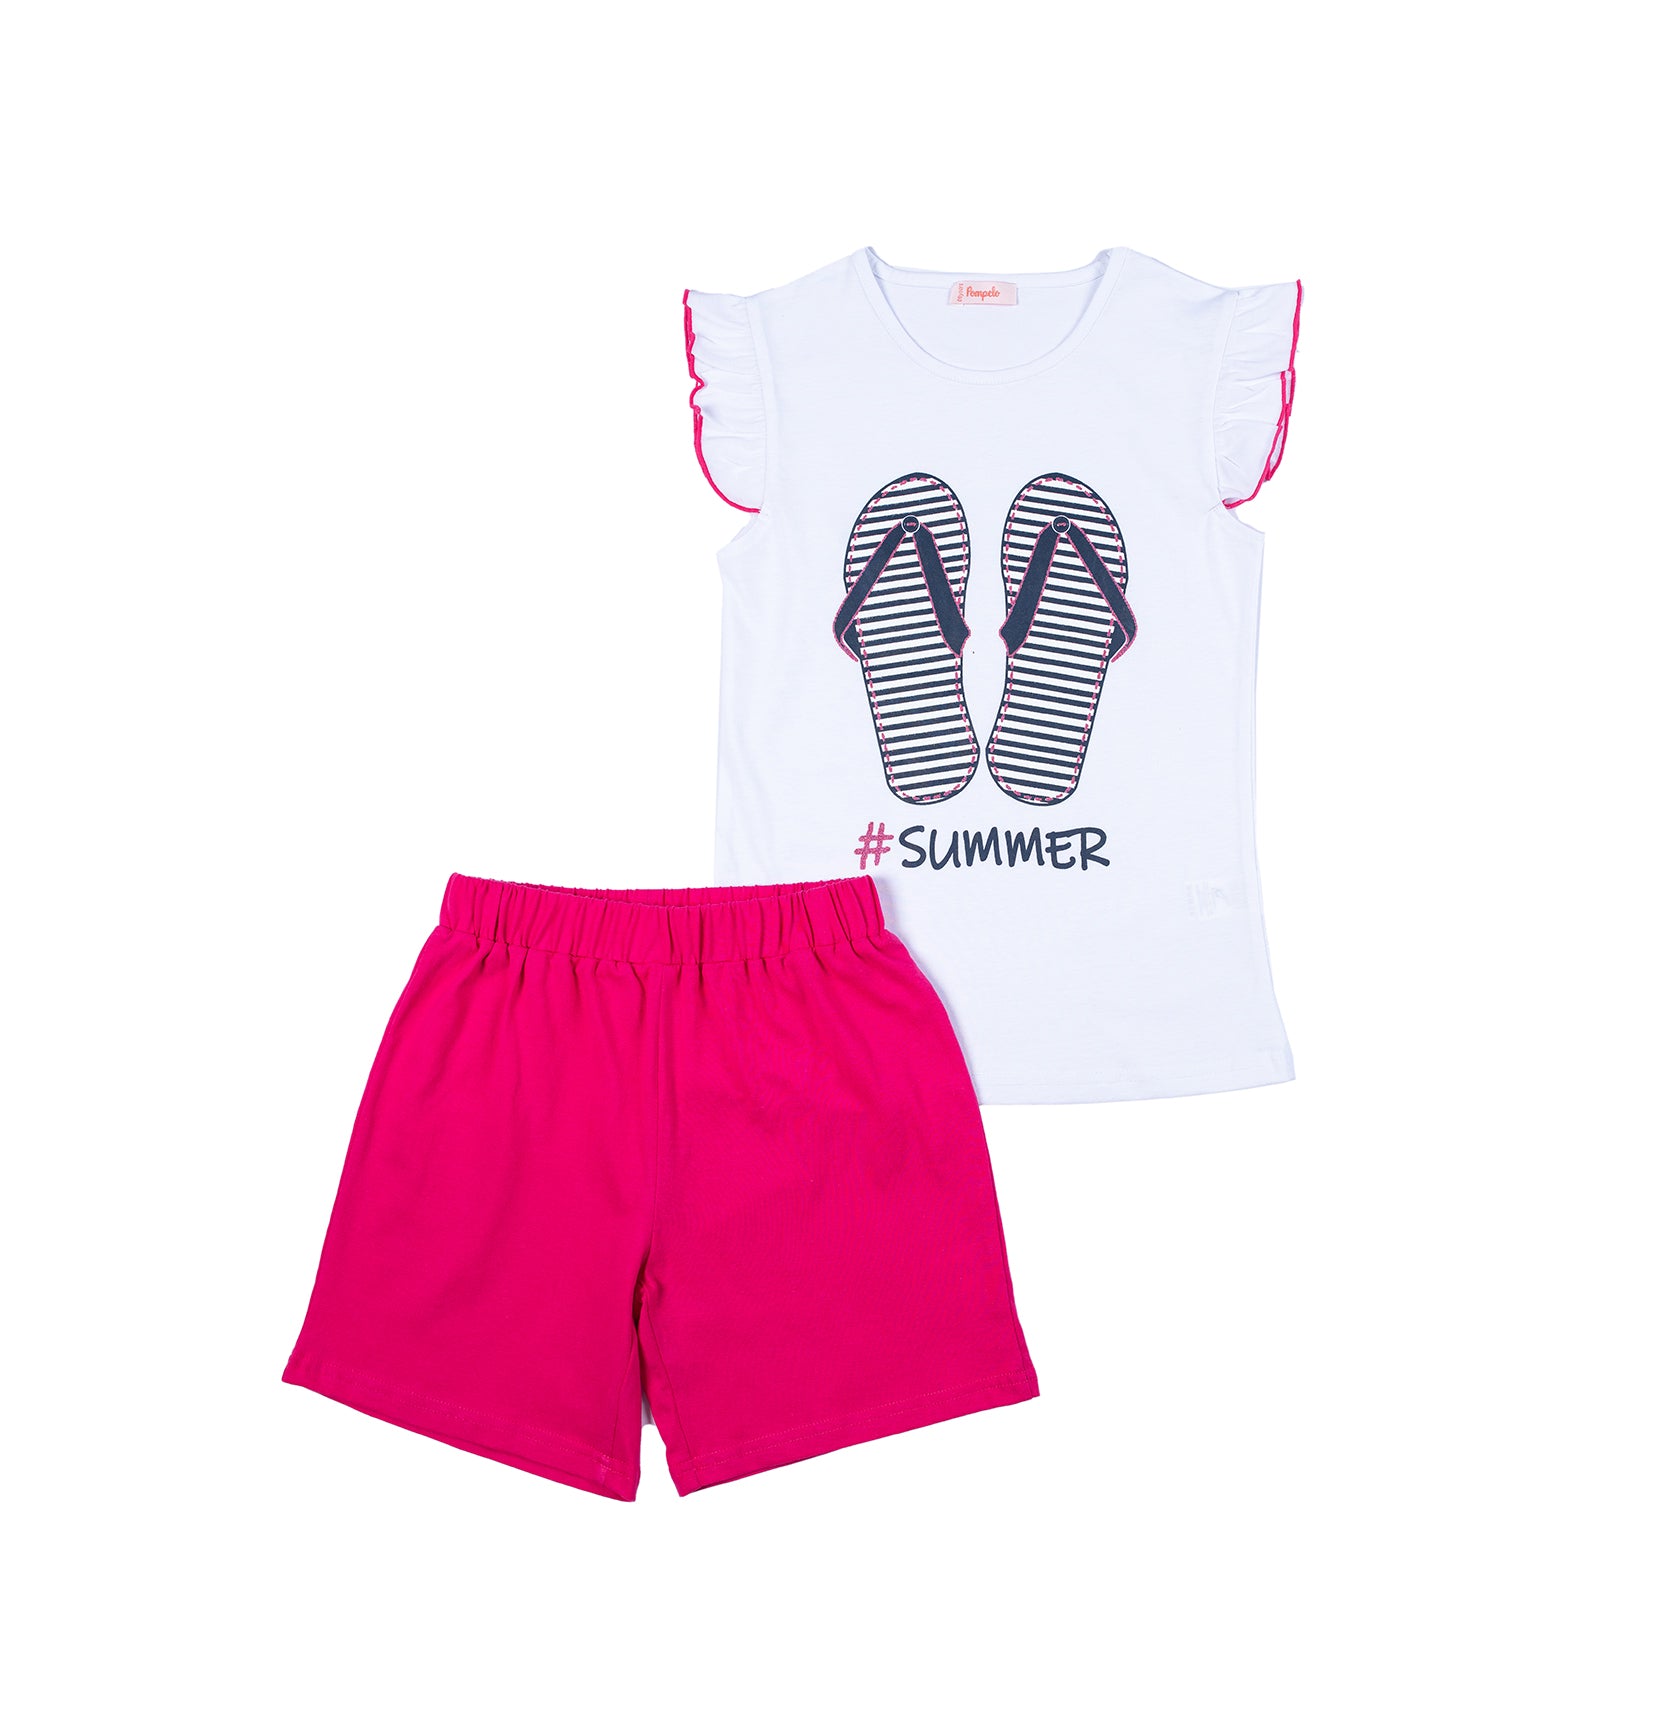 Girl summer set of sleeveless shirt and shorts by Pompelo